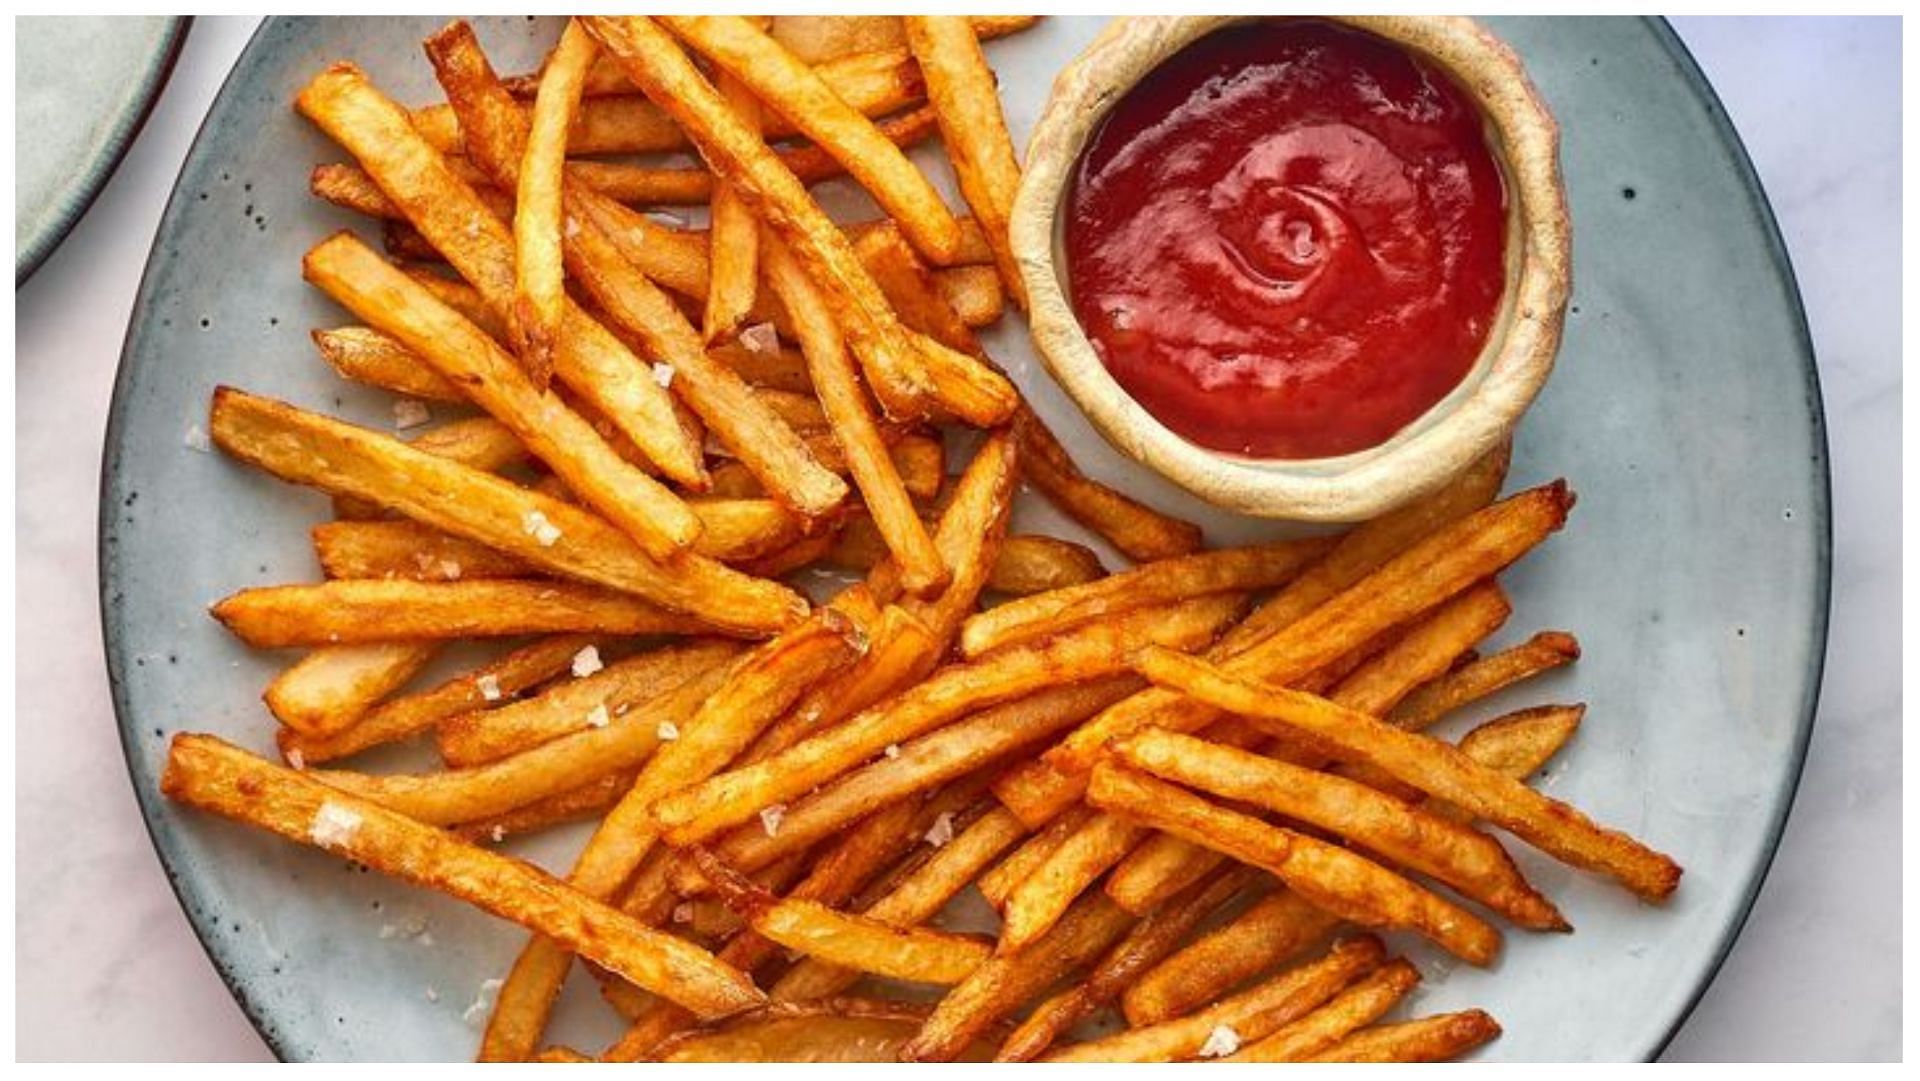 Most major fast food chains are offering deals and freebies this National French fries day (Image via Pinterest/Ann Mac)